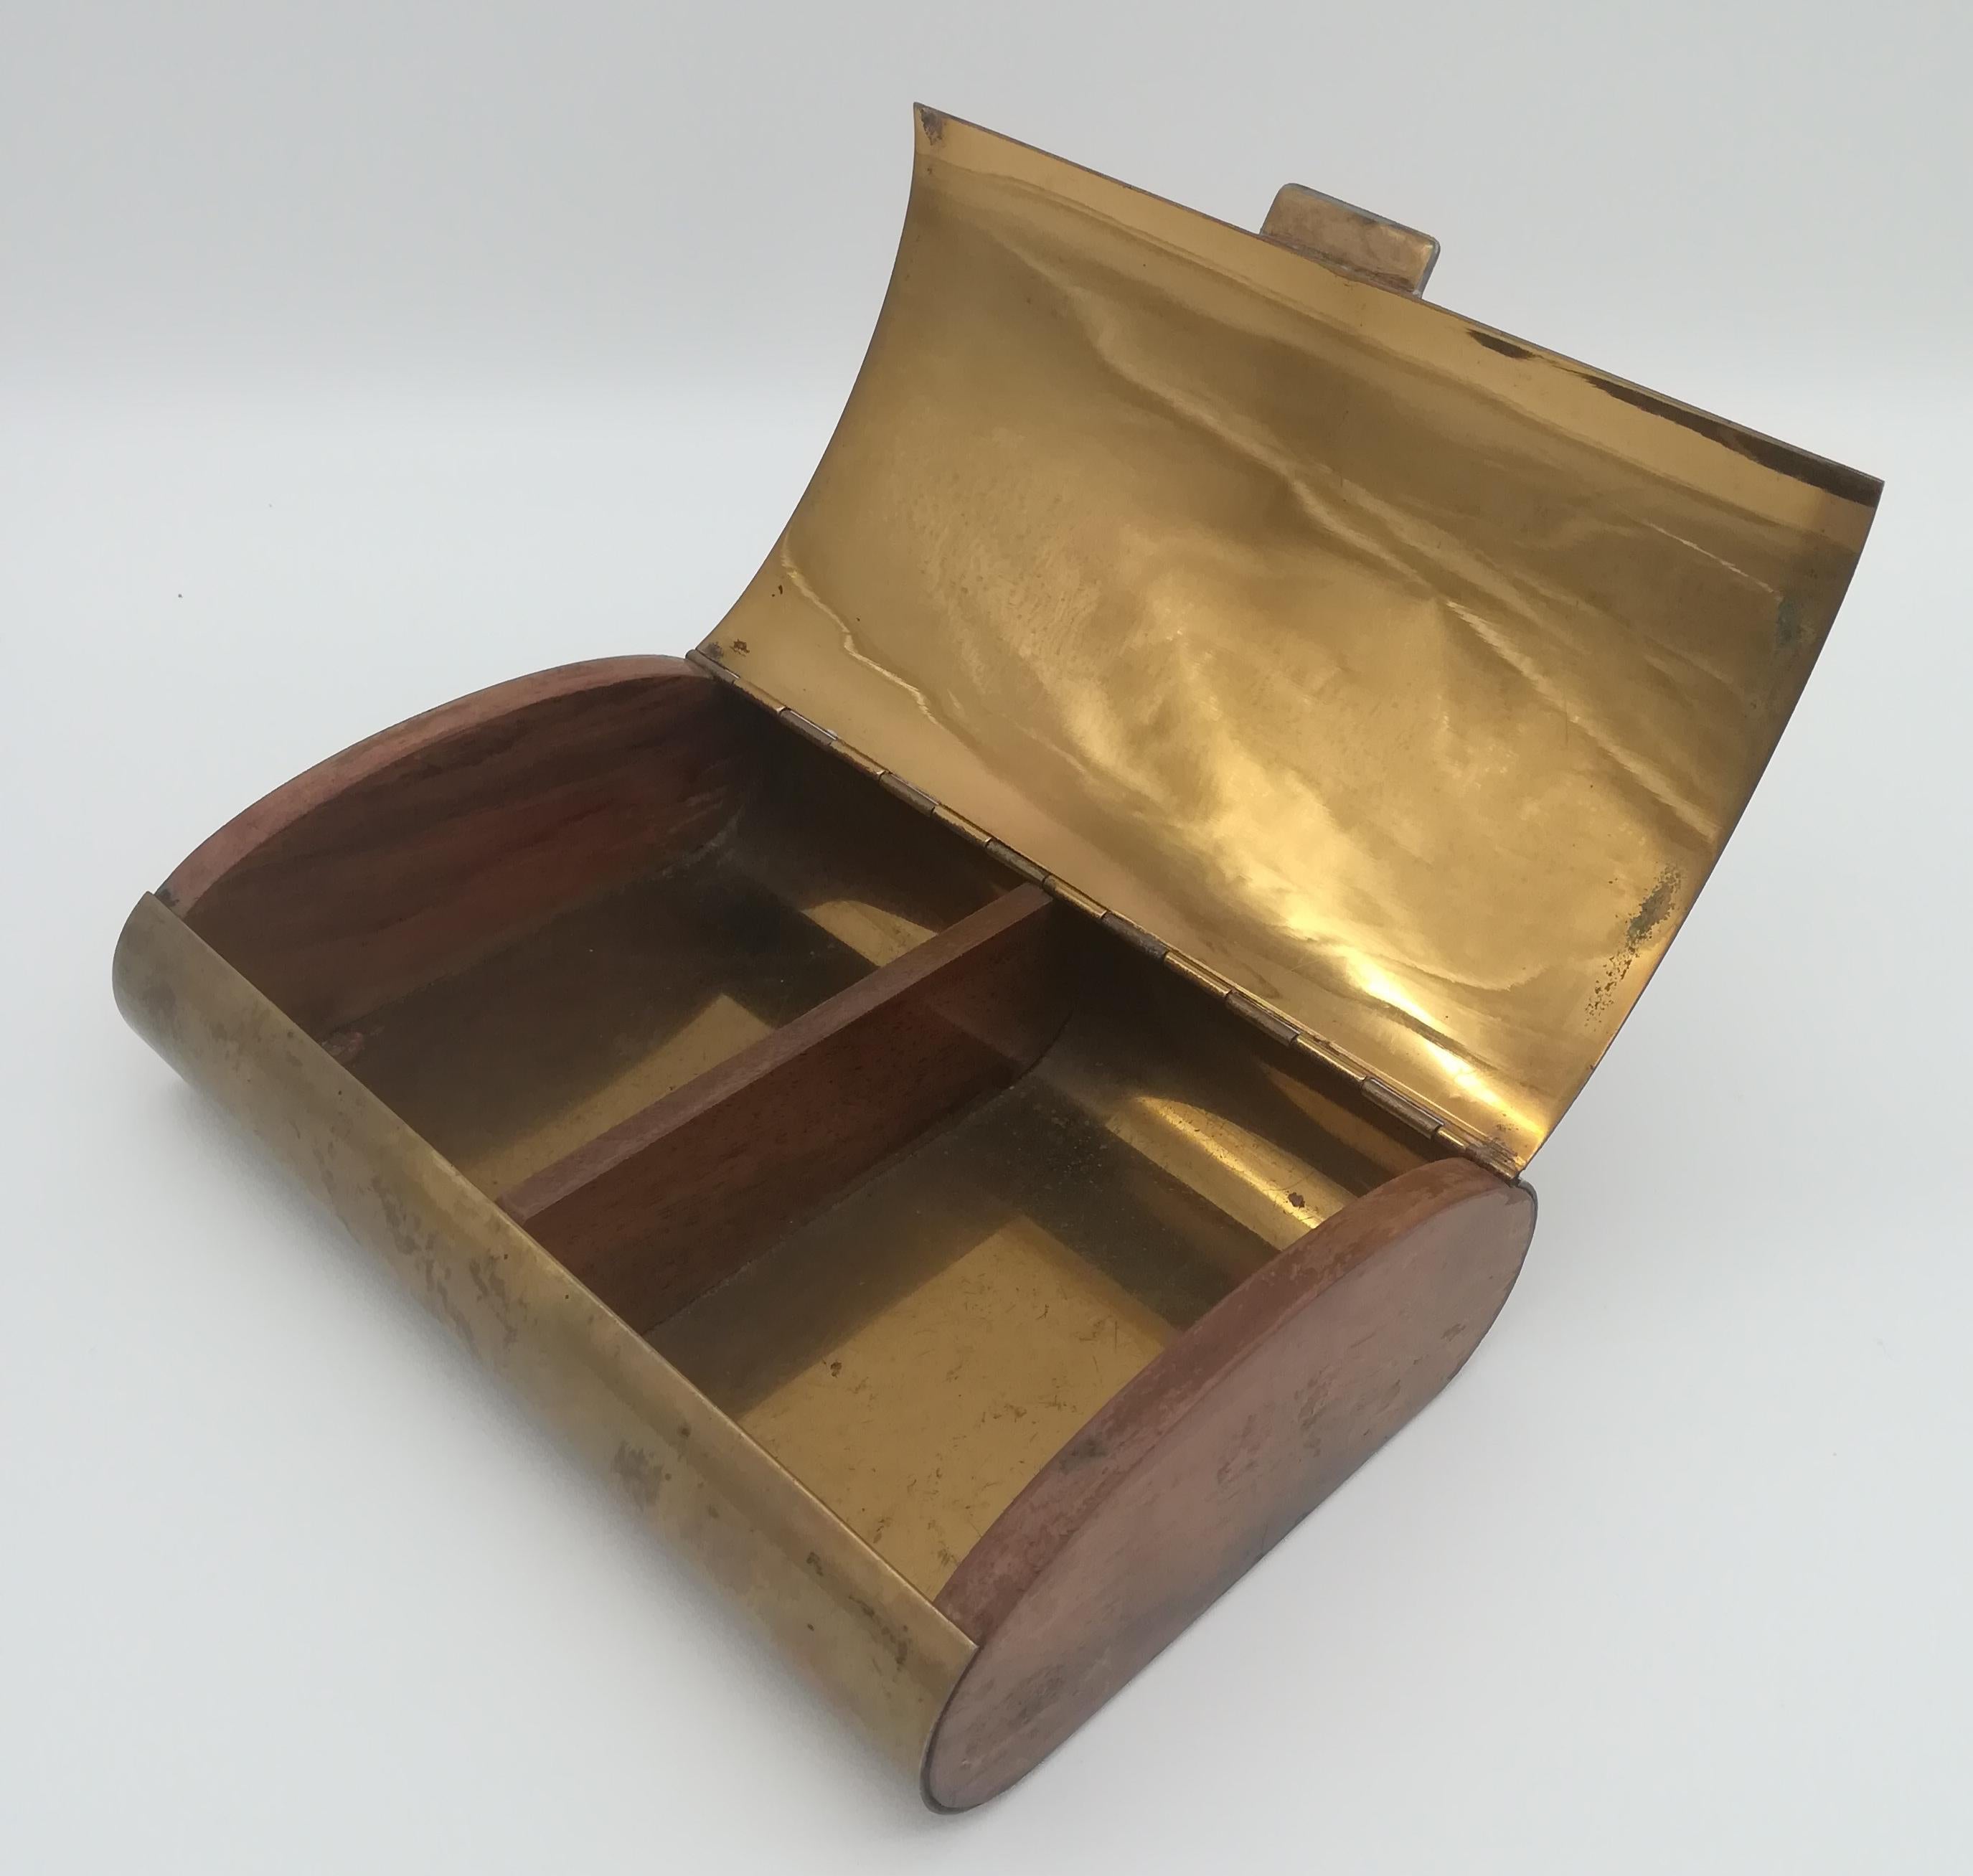 This lovely brass and wooden cigarette box, designed by Carl Auböck, shows a beautiful guilloche top surface. The brass shows fine patina, enriched by the contrast of the wooden sides of the box. The bottom surface is slightly tarnished, the